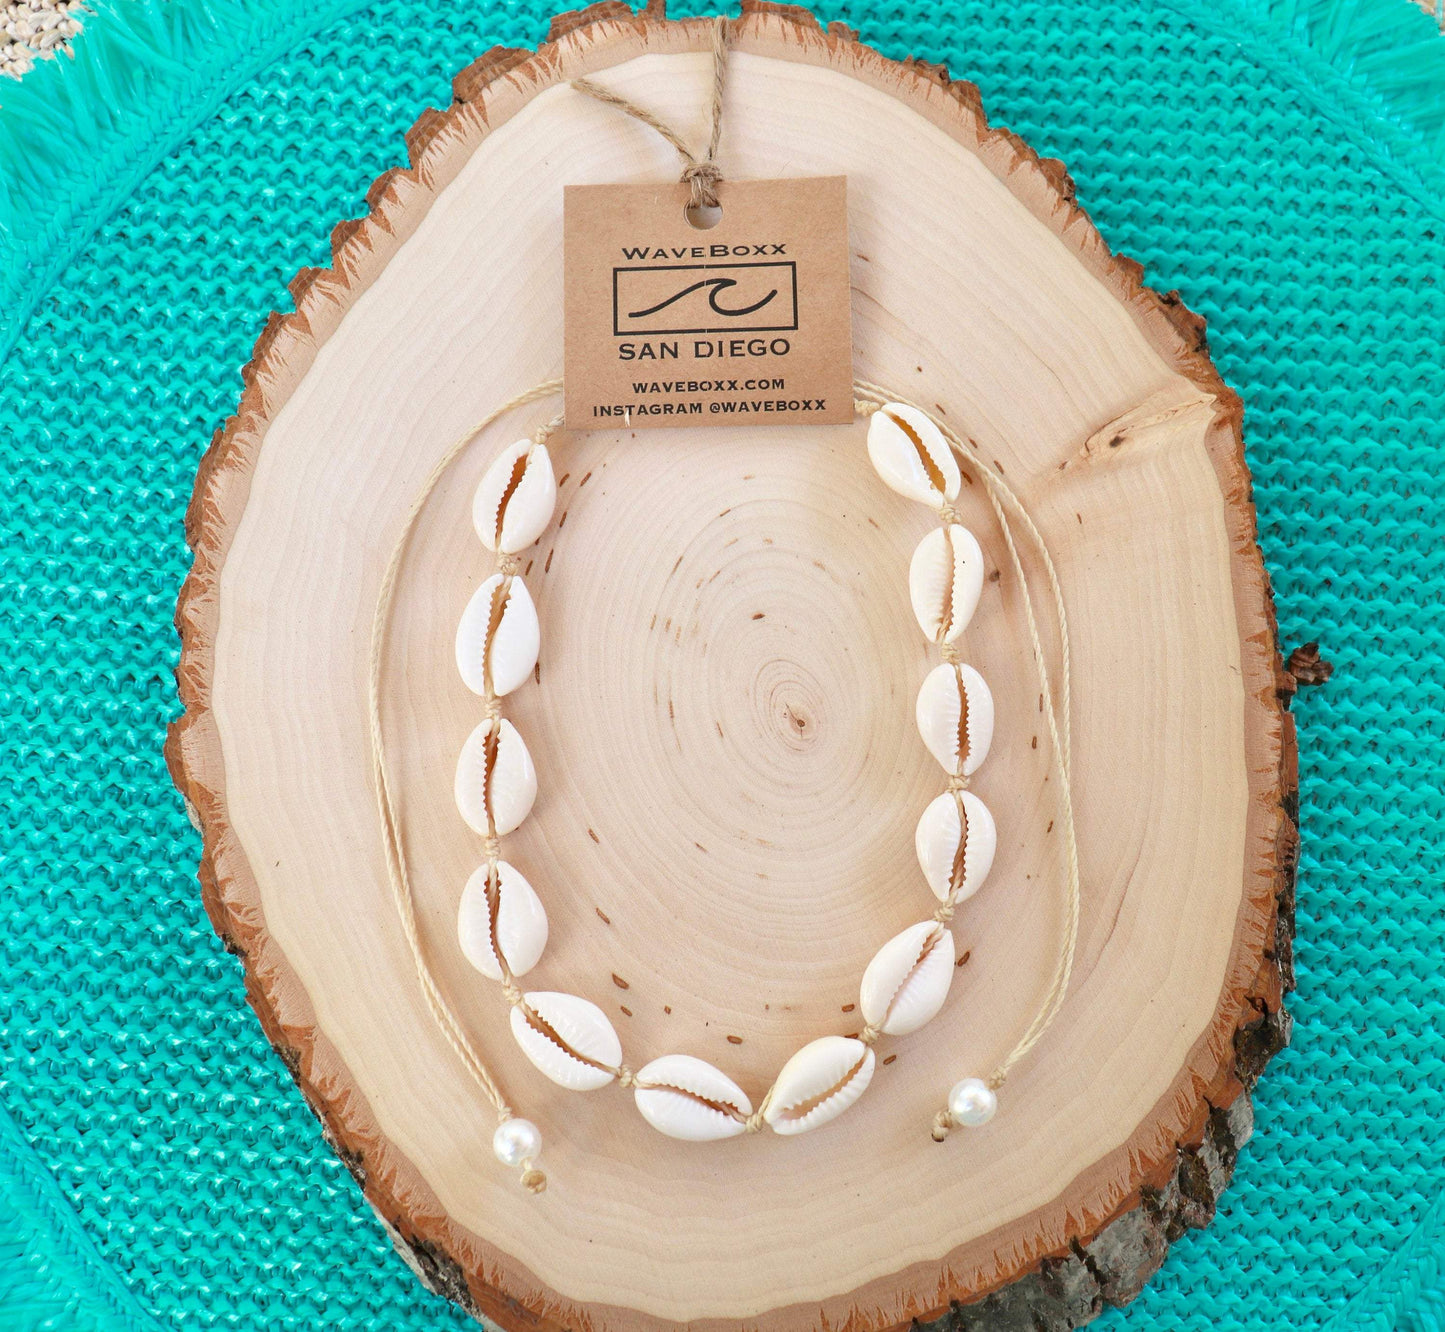 Cream Waterproof Cowrie Shell Choker Necklaces